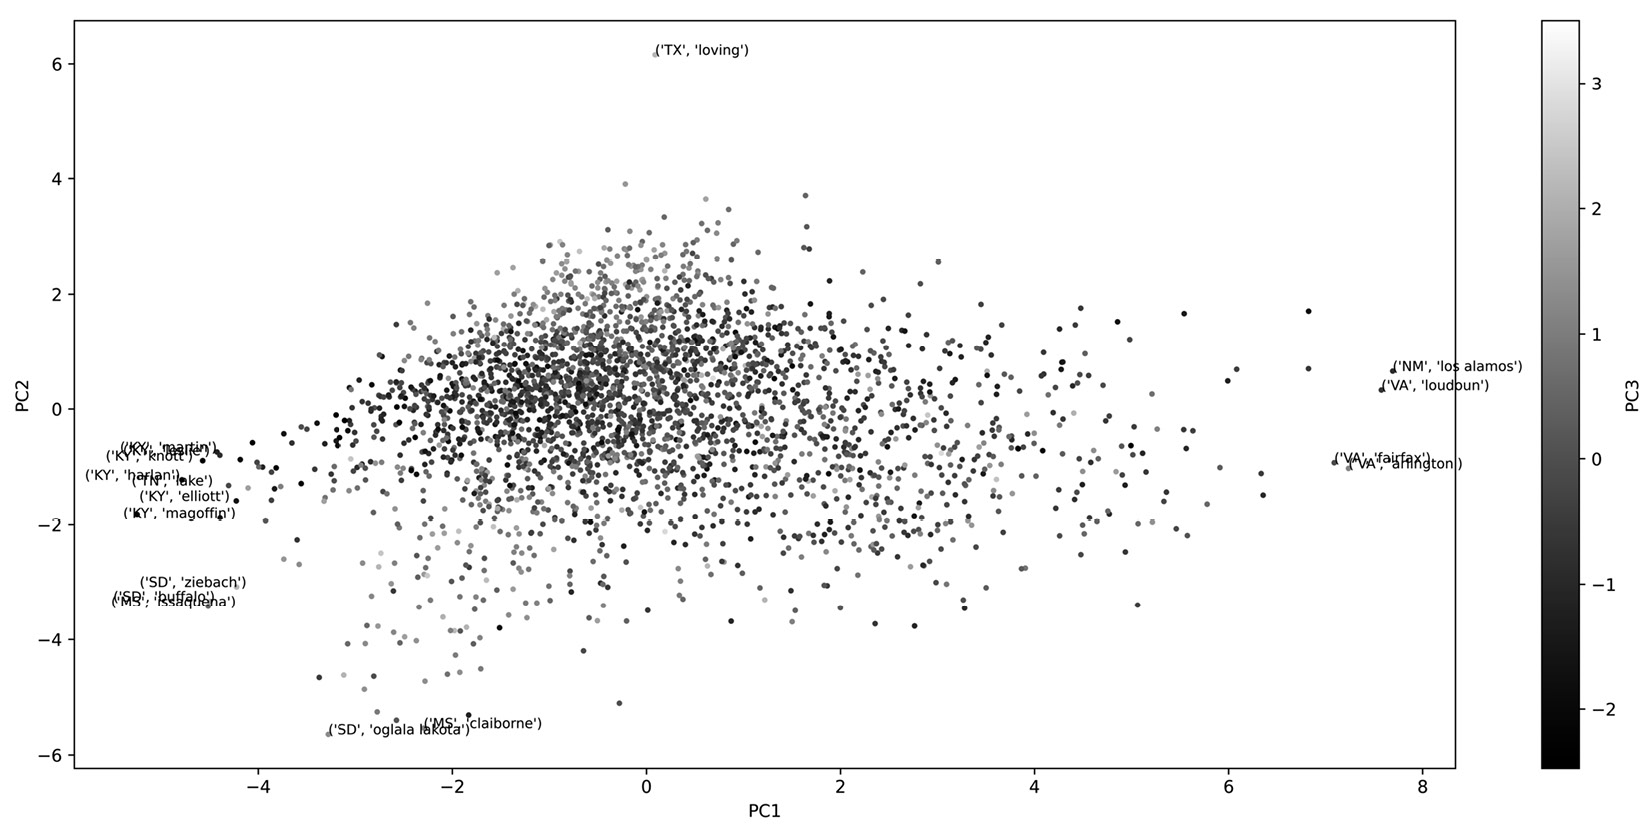 Figure 17.8 – 3D scatterplot of PC1, PC2, PC3 PCA for transformed county_df
